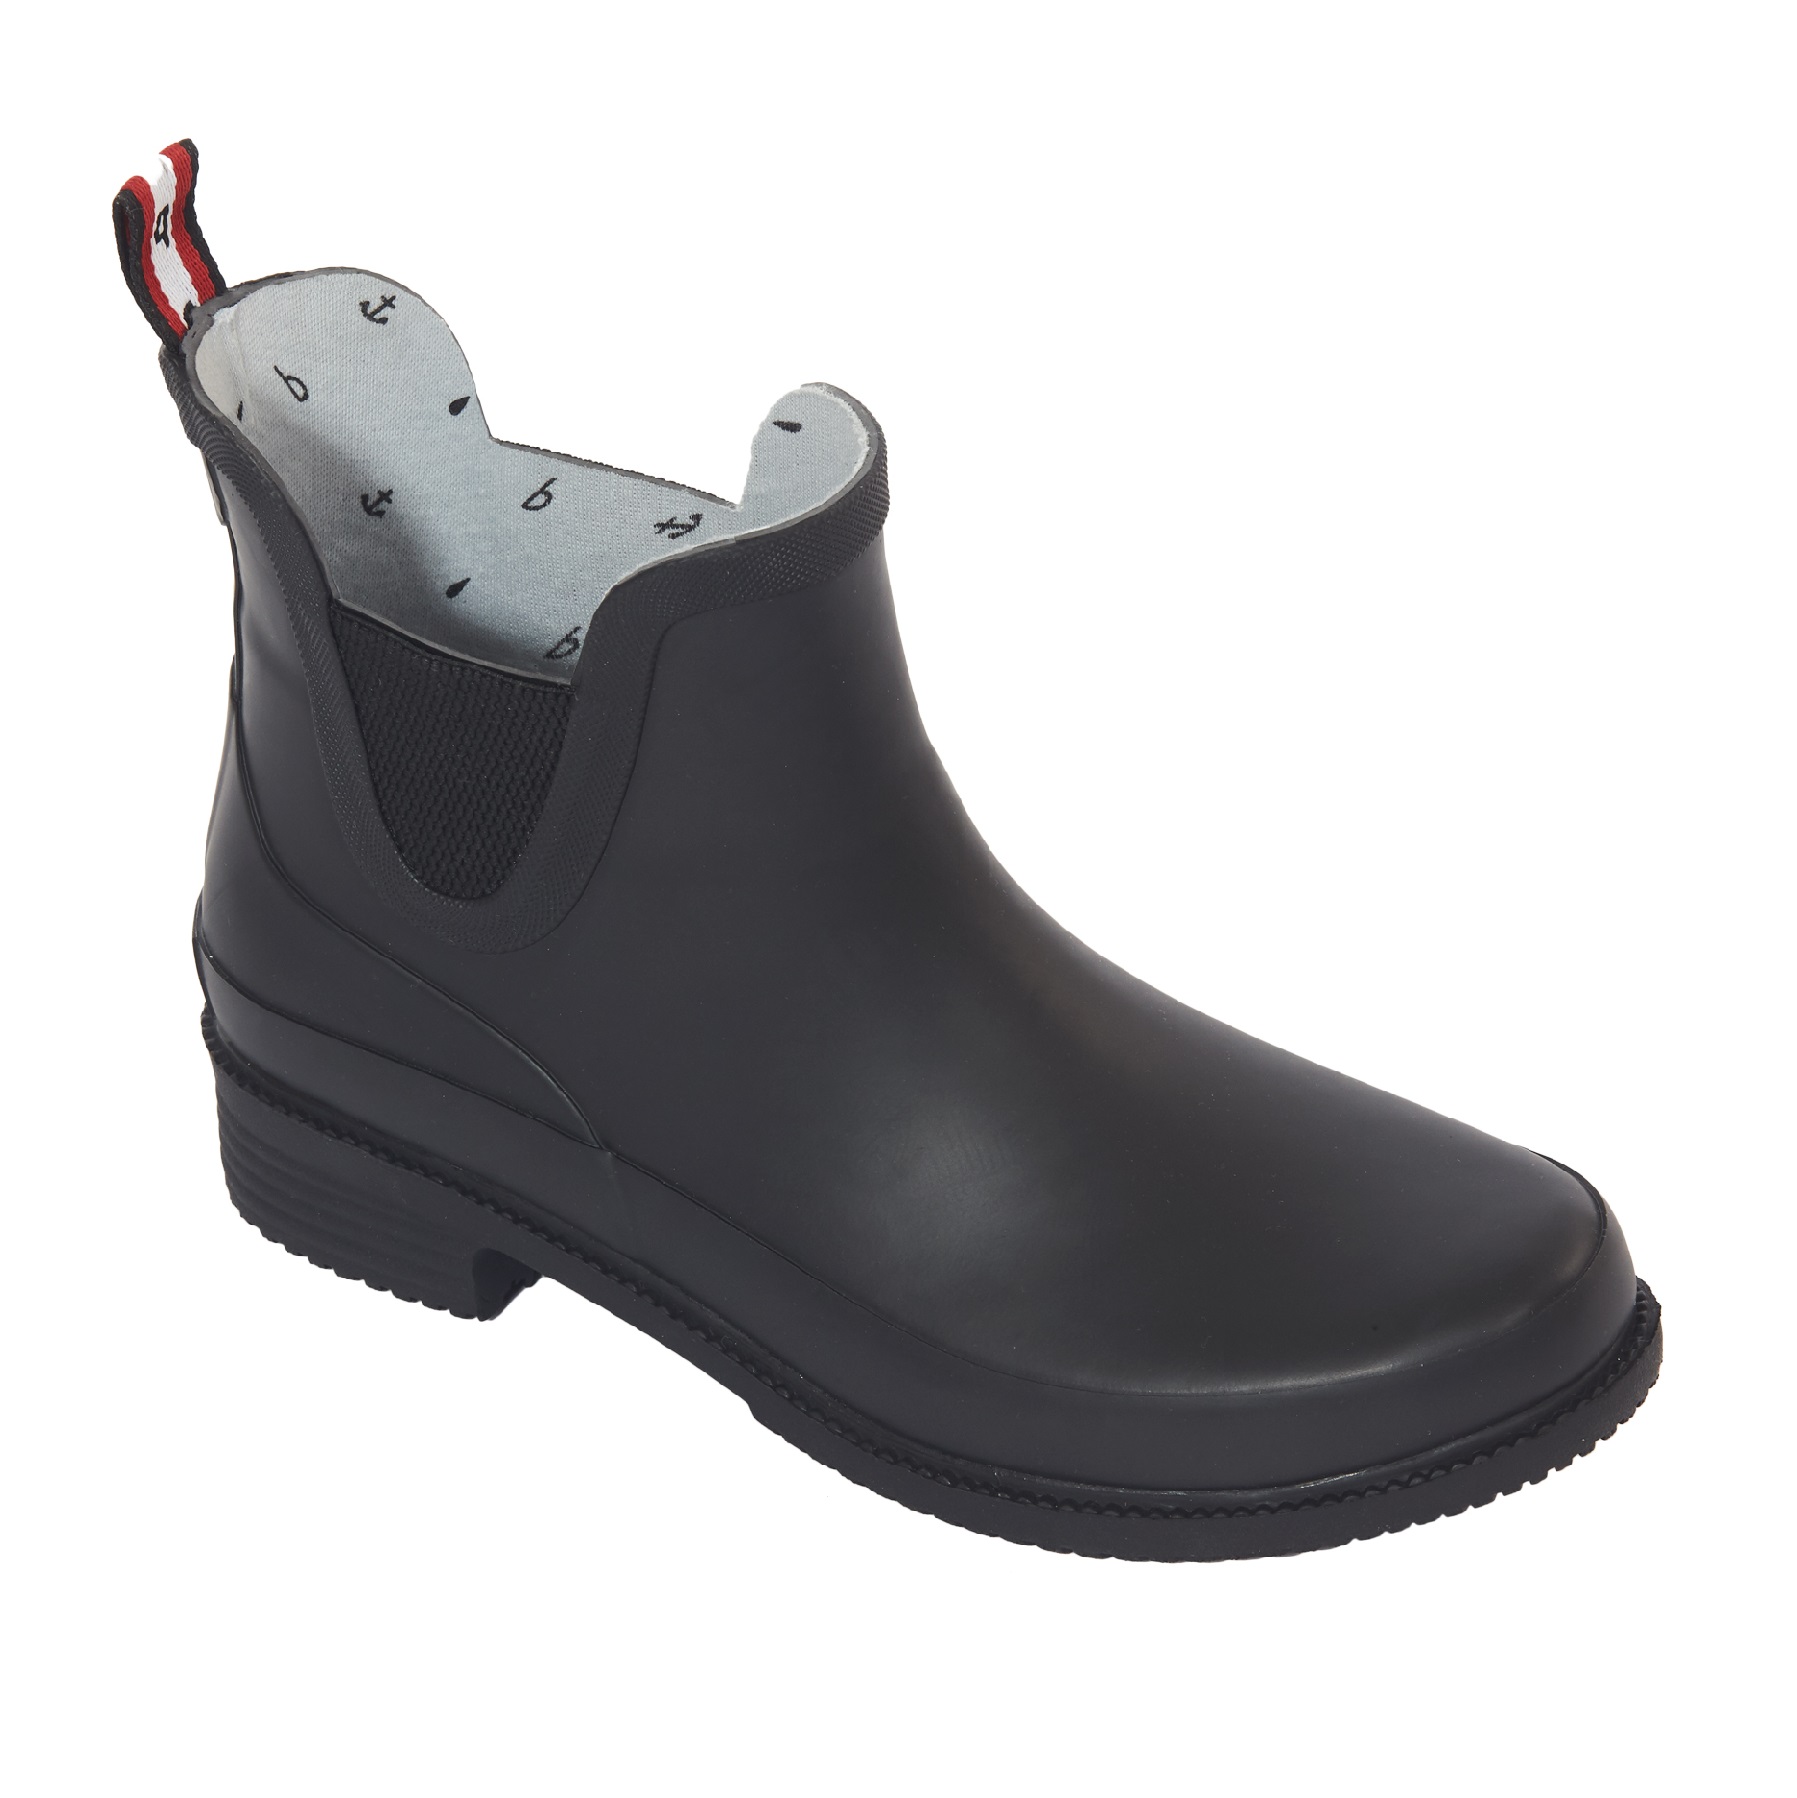 Biotime Women's Welland Rain Boots with removable memory foam insole